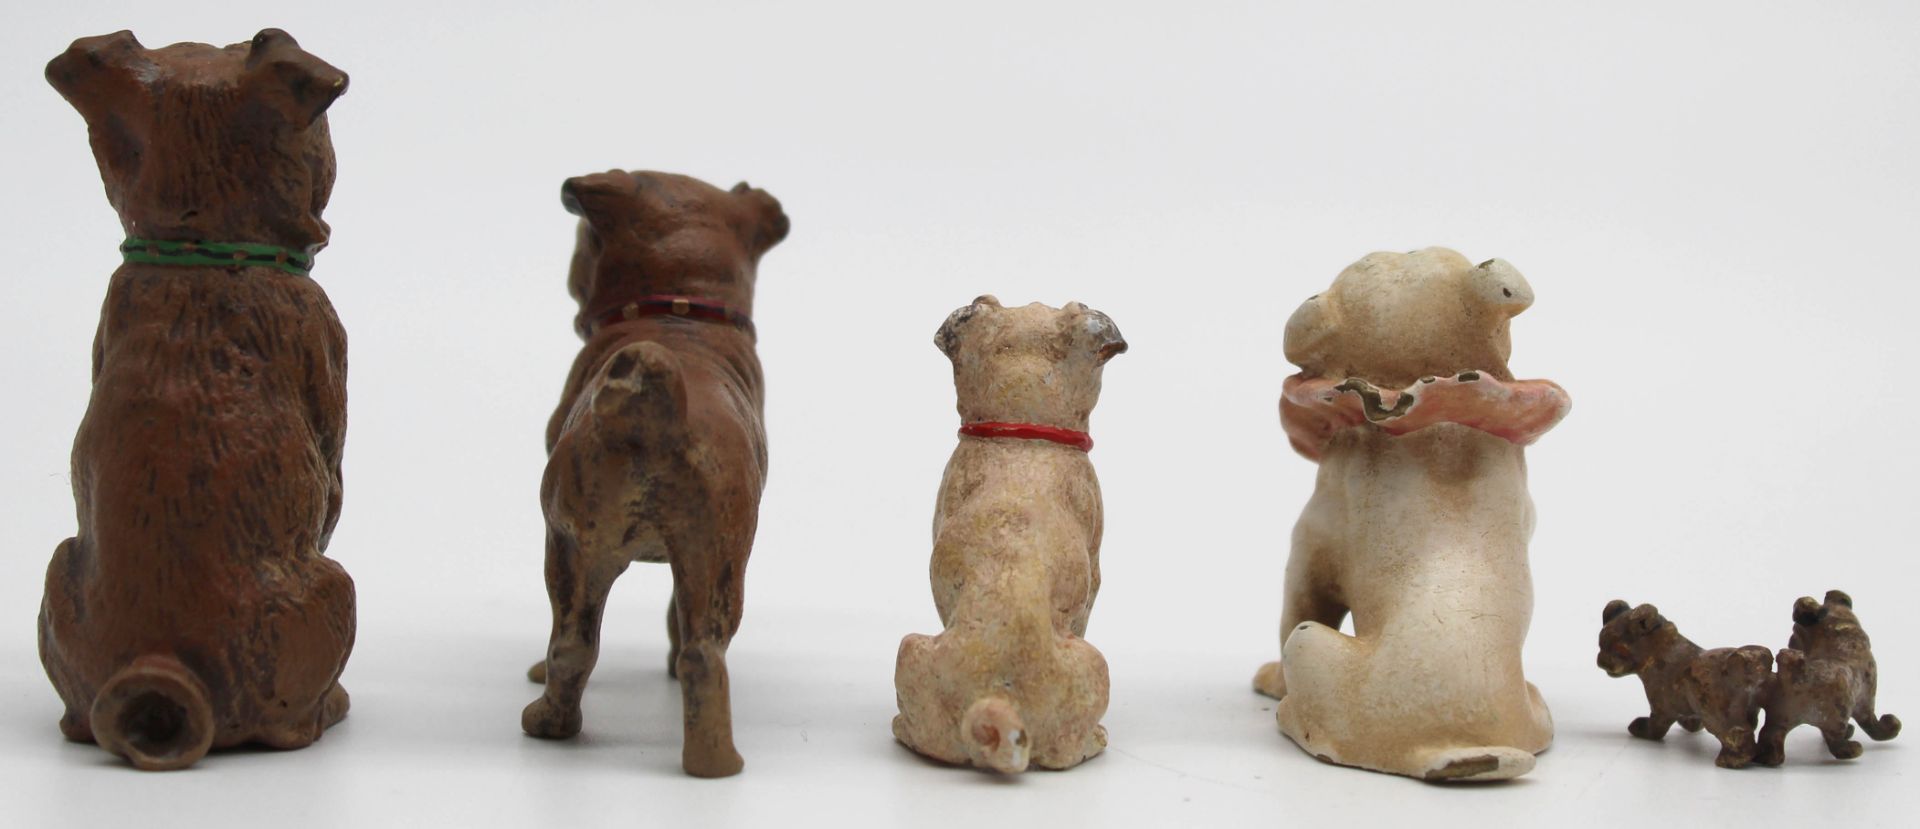 5 pugs. Cold painted bronze, Vienna? - Image 8 of 13